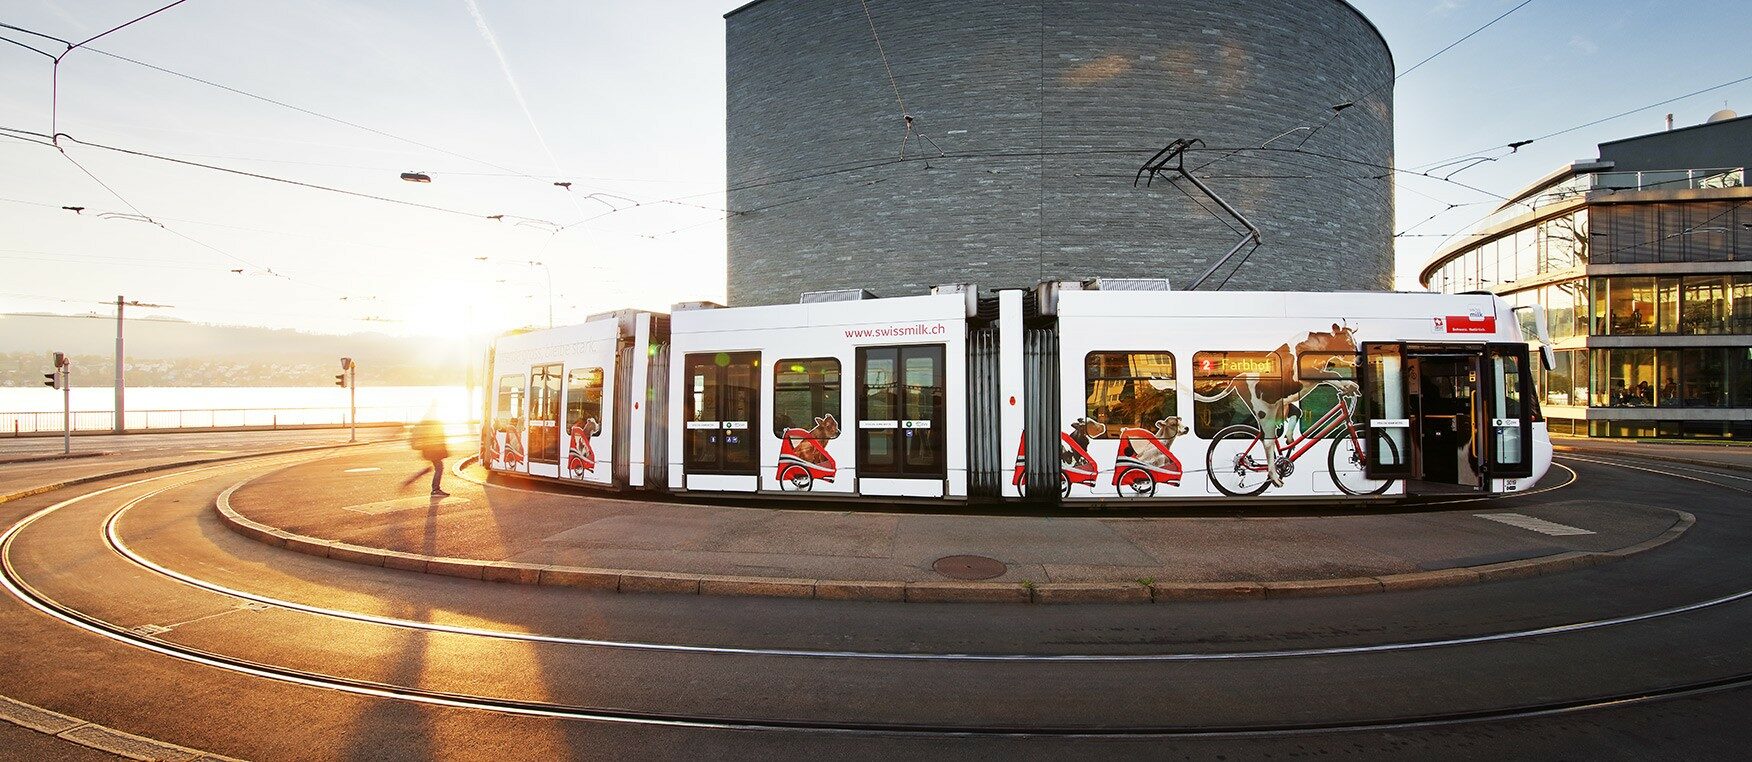 Fully wrapped tram